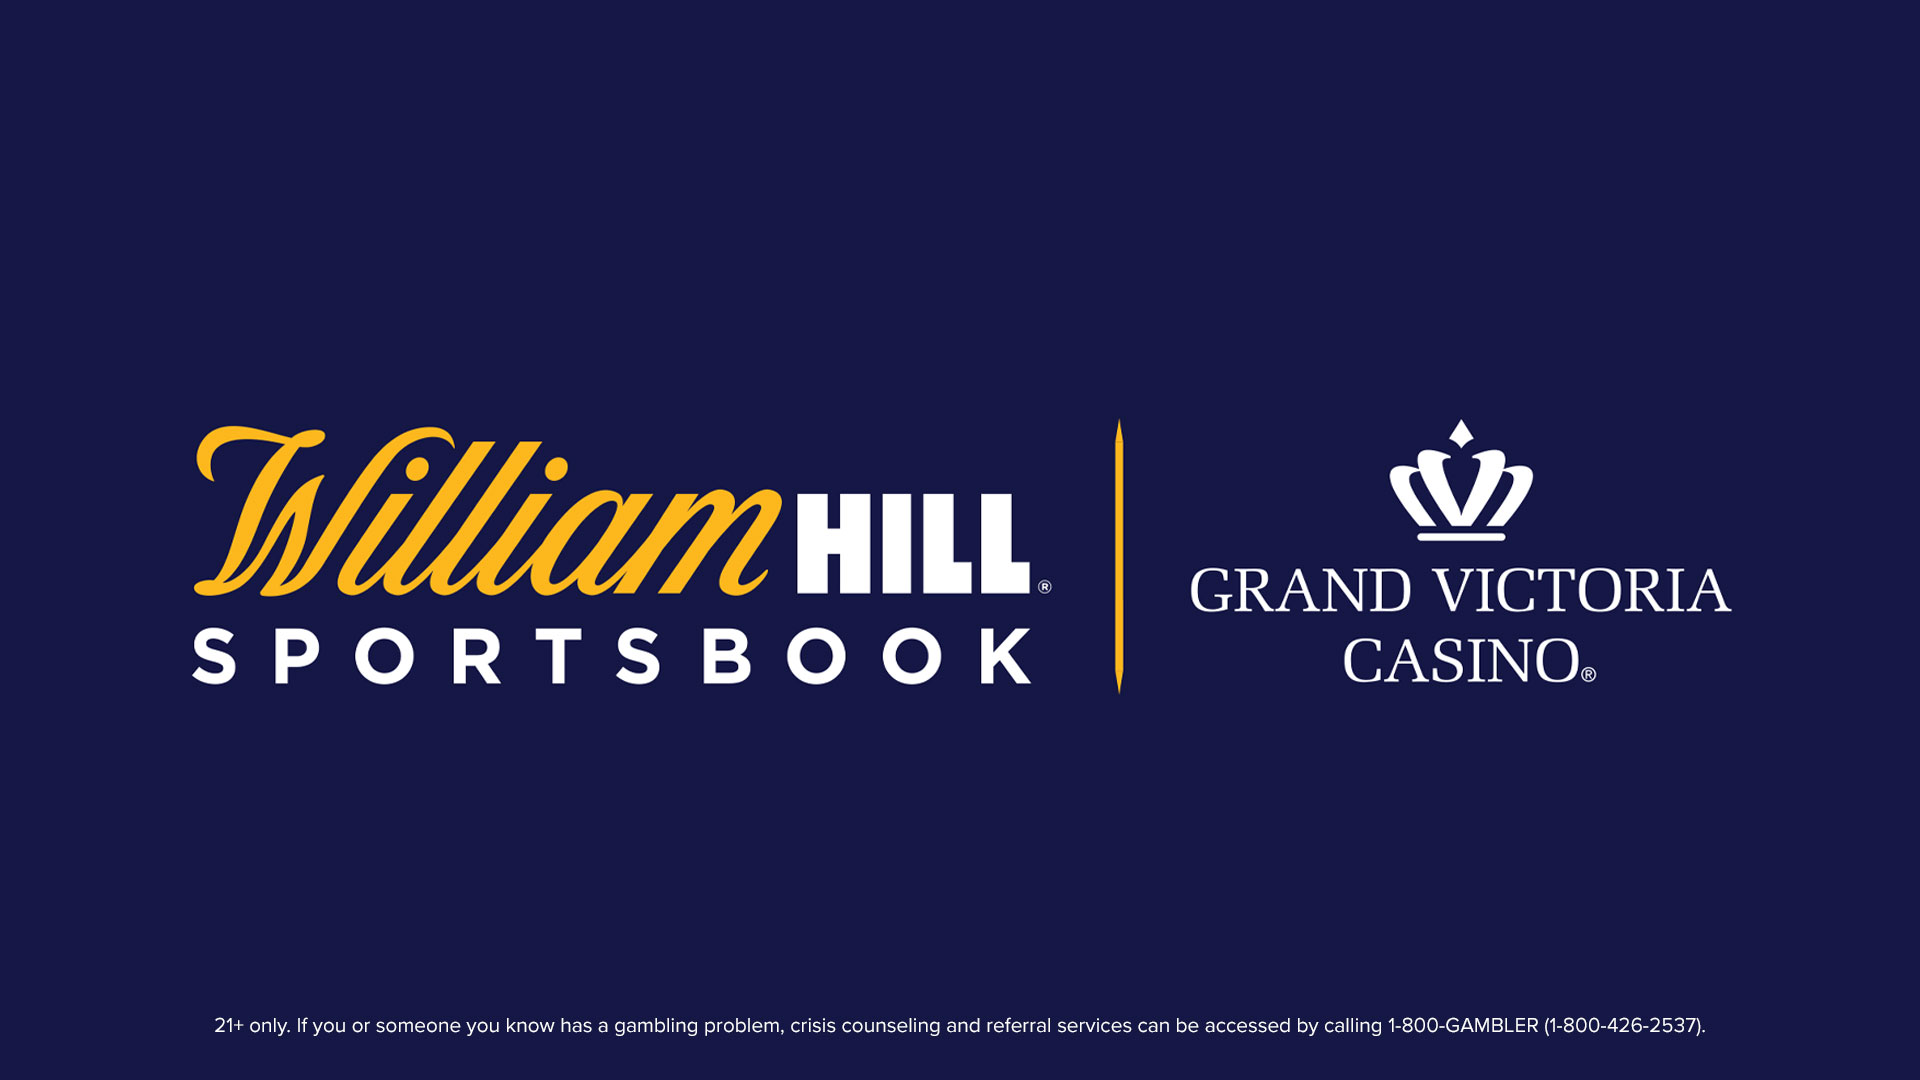 Williamhill sportsbook another word for making the world a better place